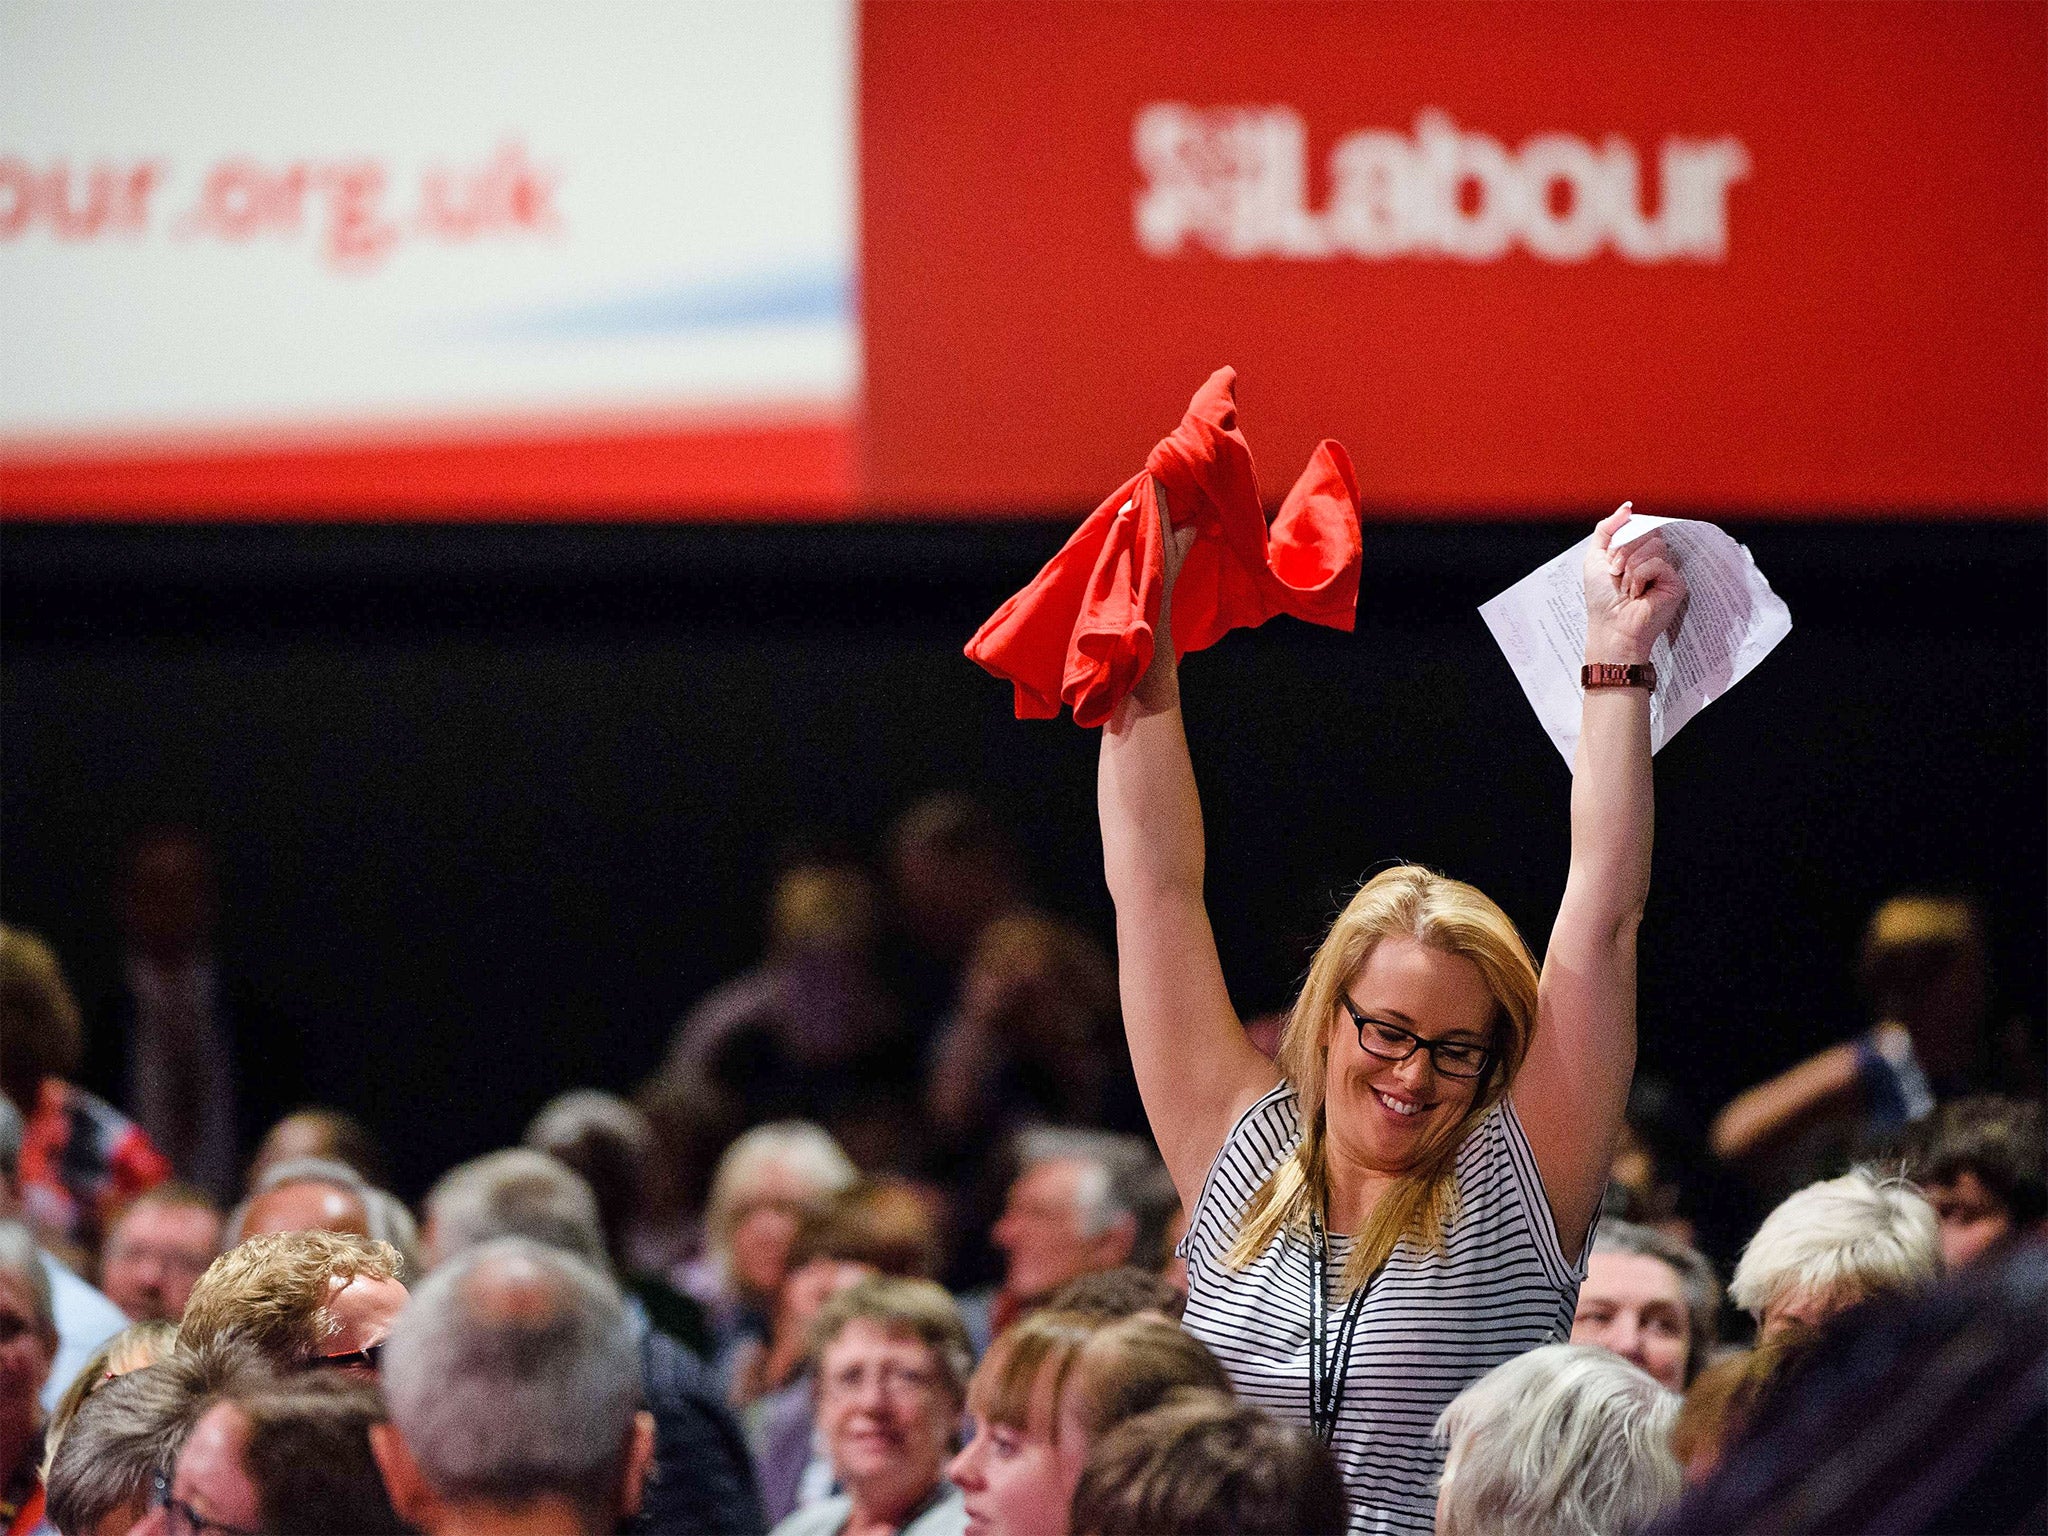 A Labour delegate celebrates after being chosen to address the audience